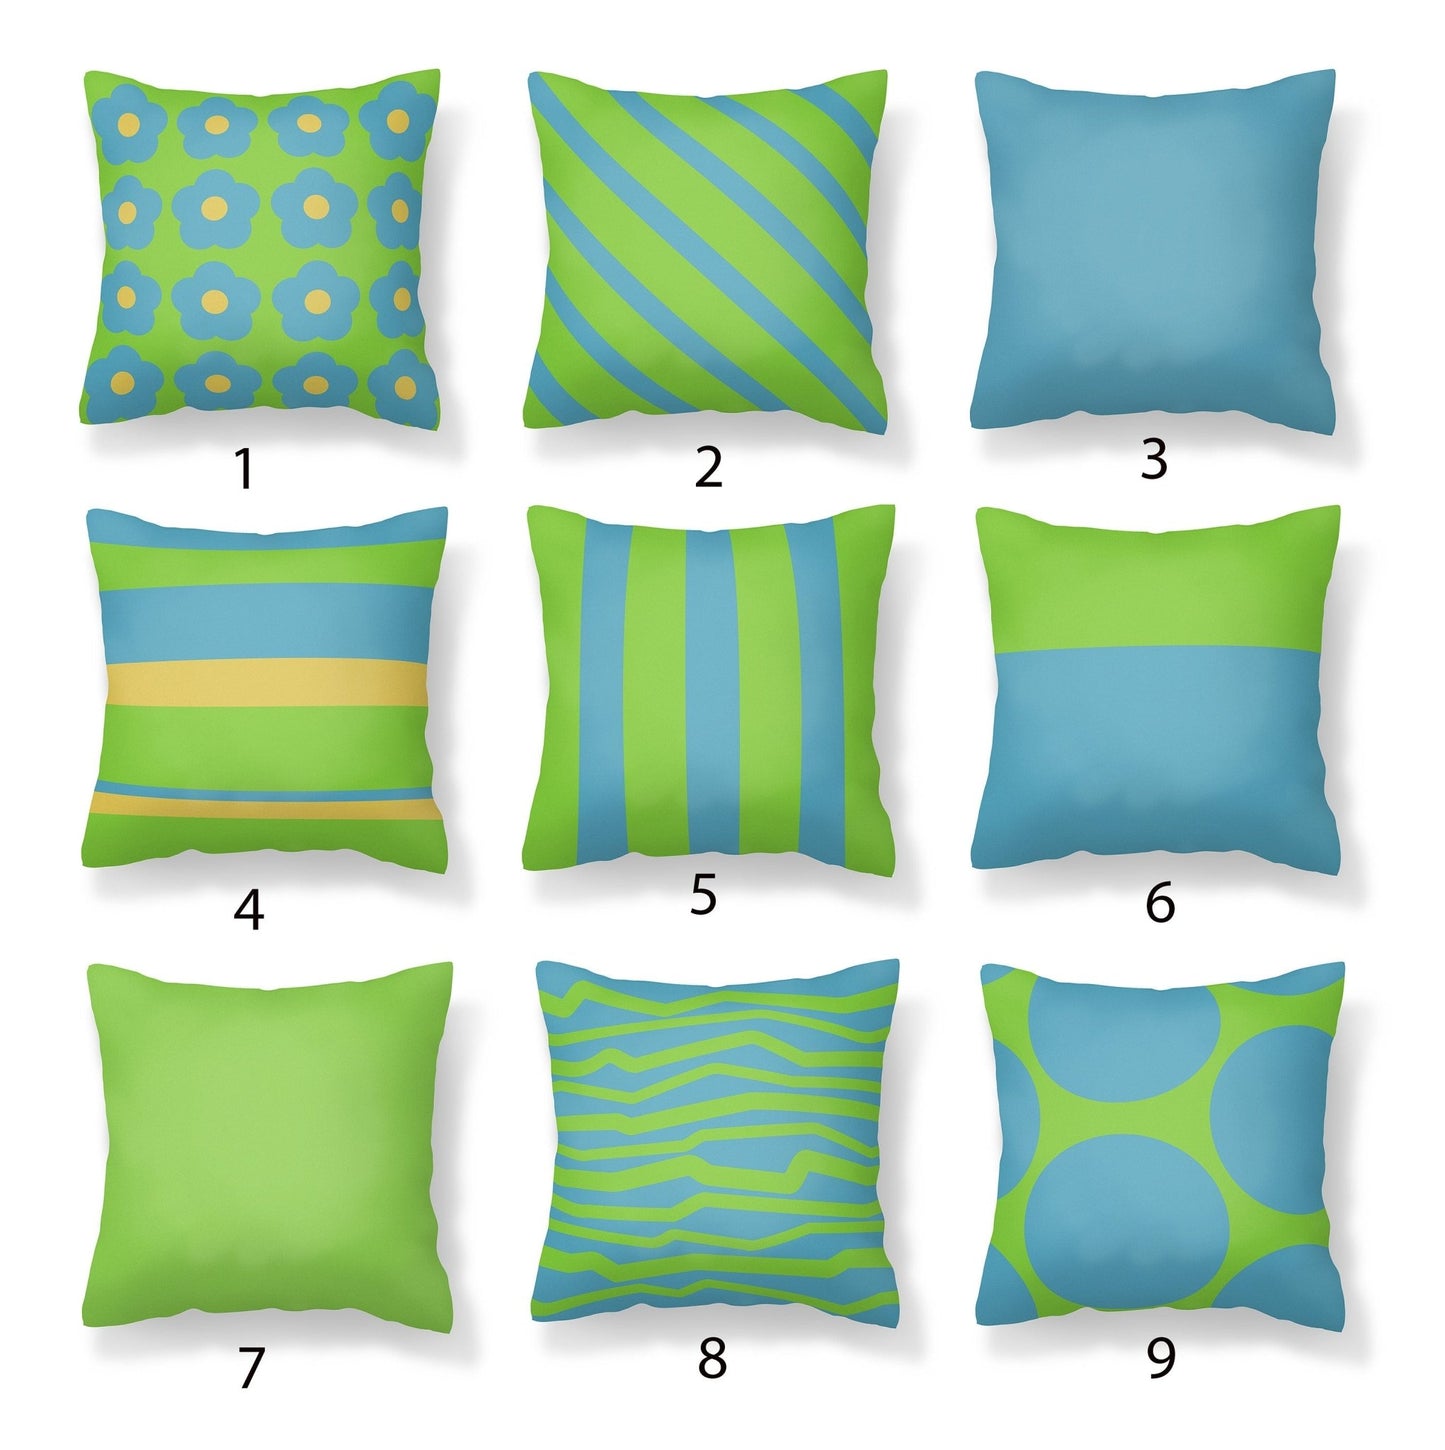 Blue and Green Striped Outdoor Pillows - Mix and Match - Throw Pillows